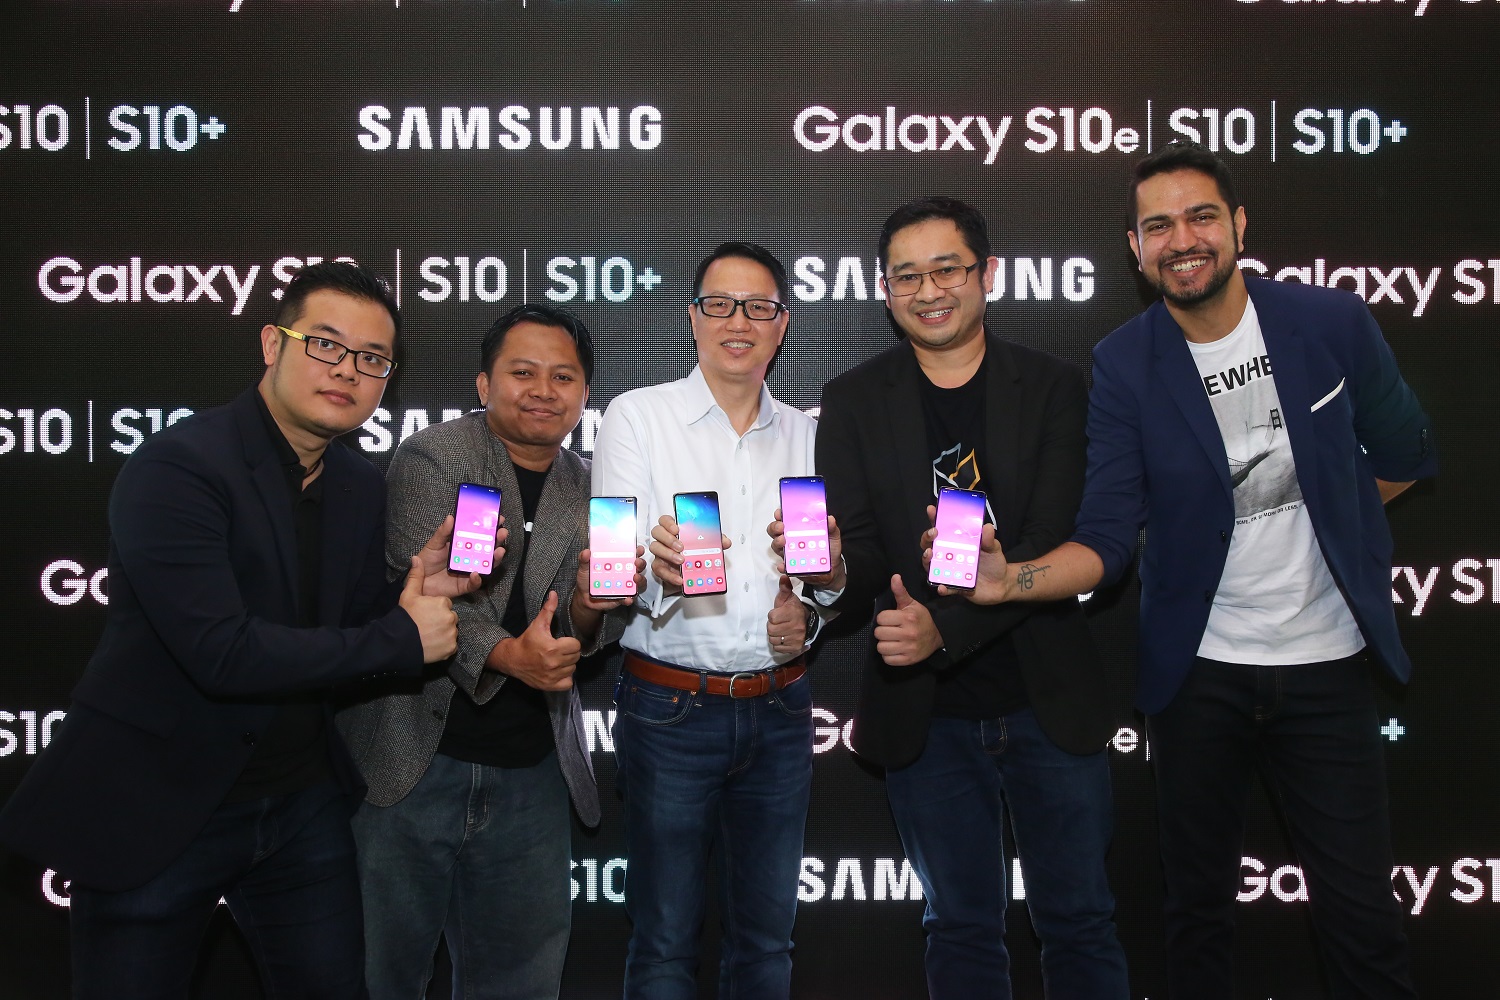 Samsung Raises the Bar with Galaxy S10:  More Screen, Cameras and Choices